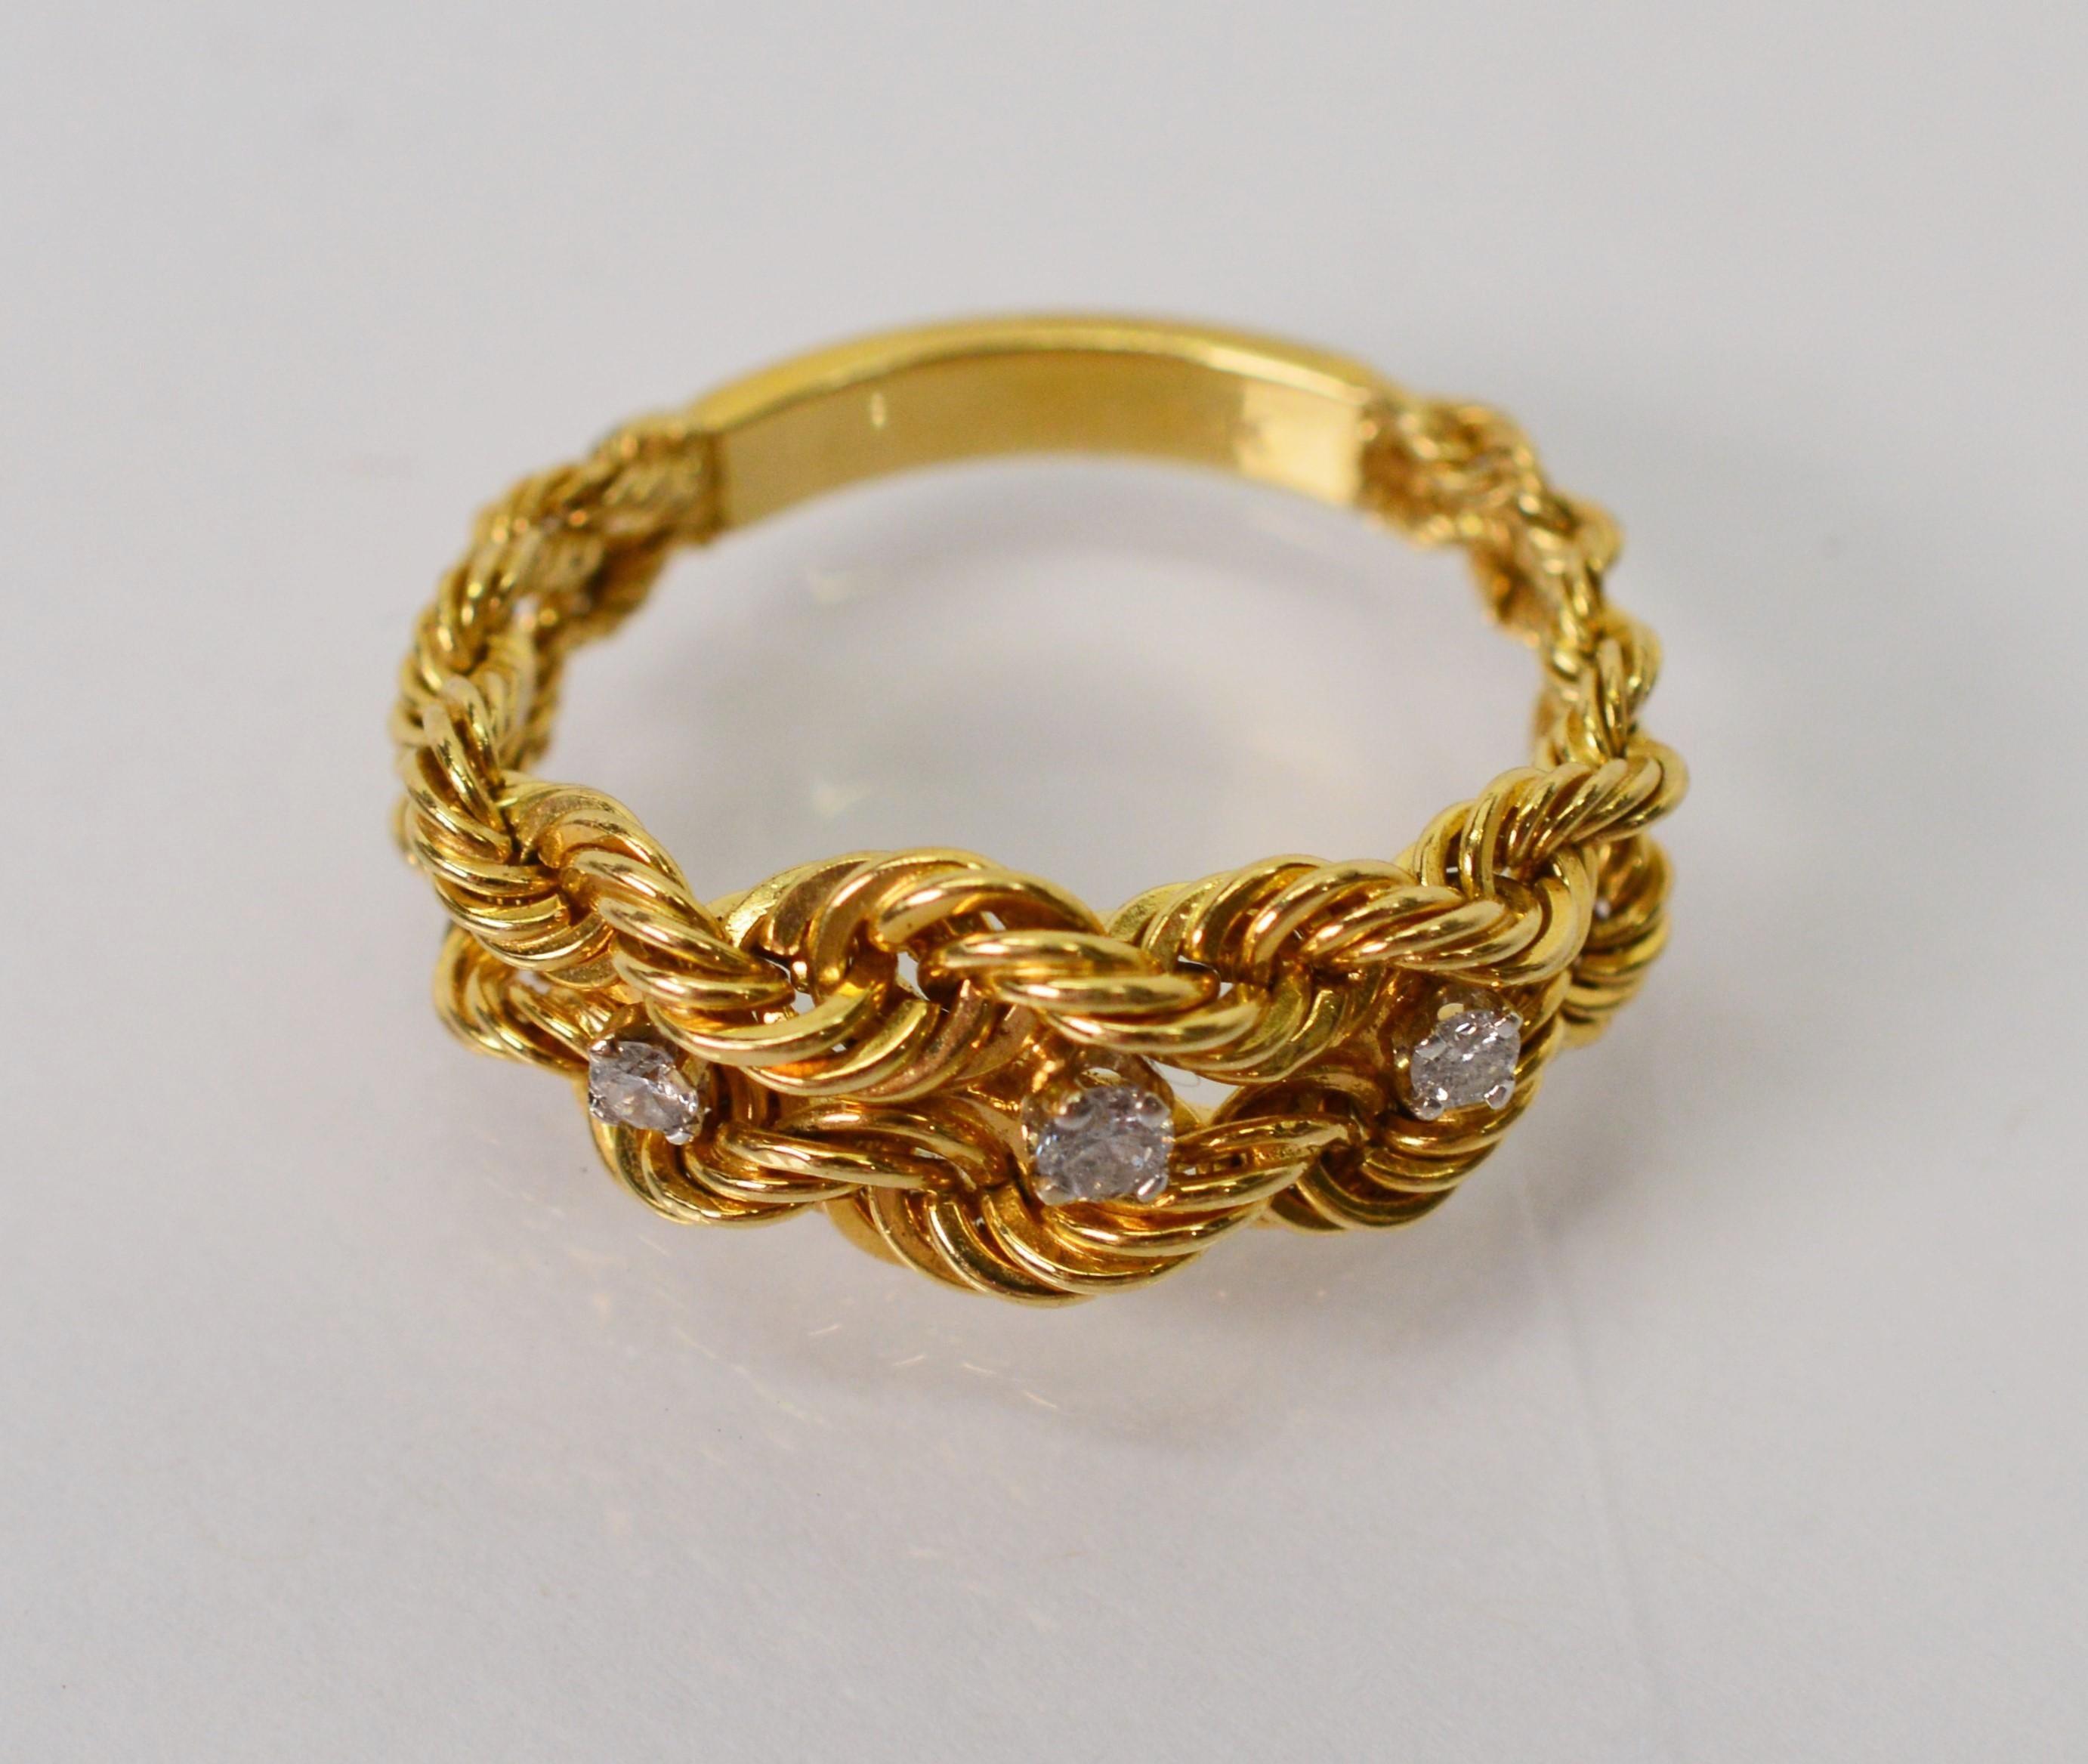 Enjoy the creativity of this unusual fourteen karat 14k yellow gold braided rope chain ring appointed with three diamonds accents. The band has a solid back and transitions to a braided and graduated rope chain face with three .02 carat diamonds